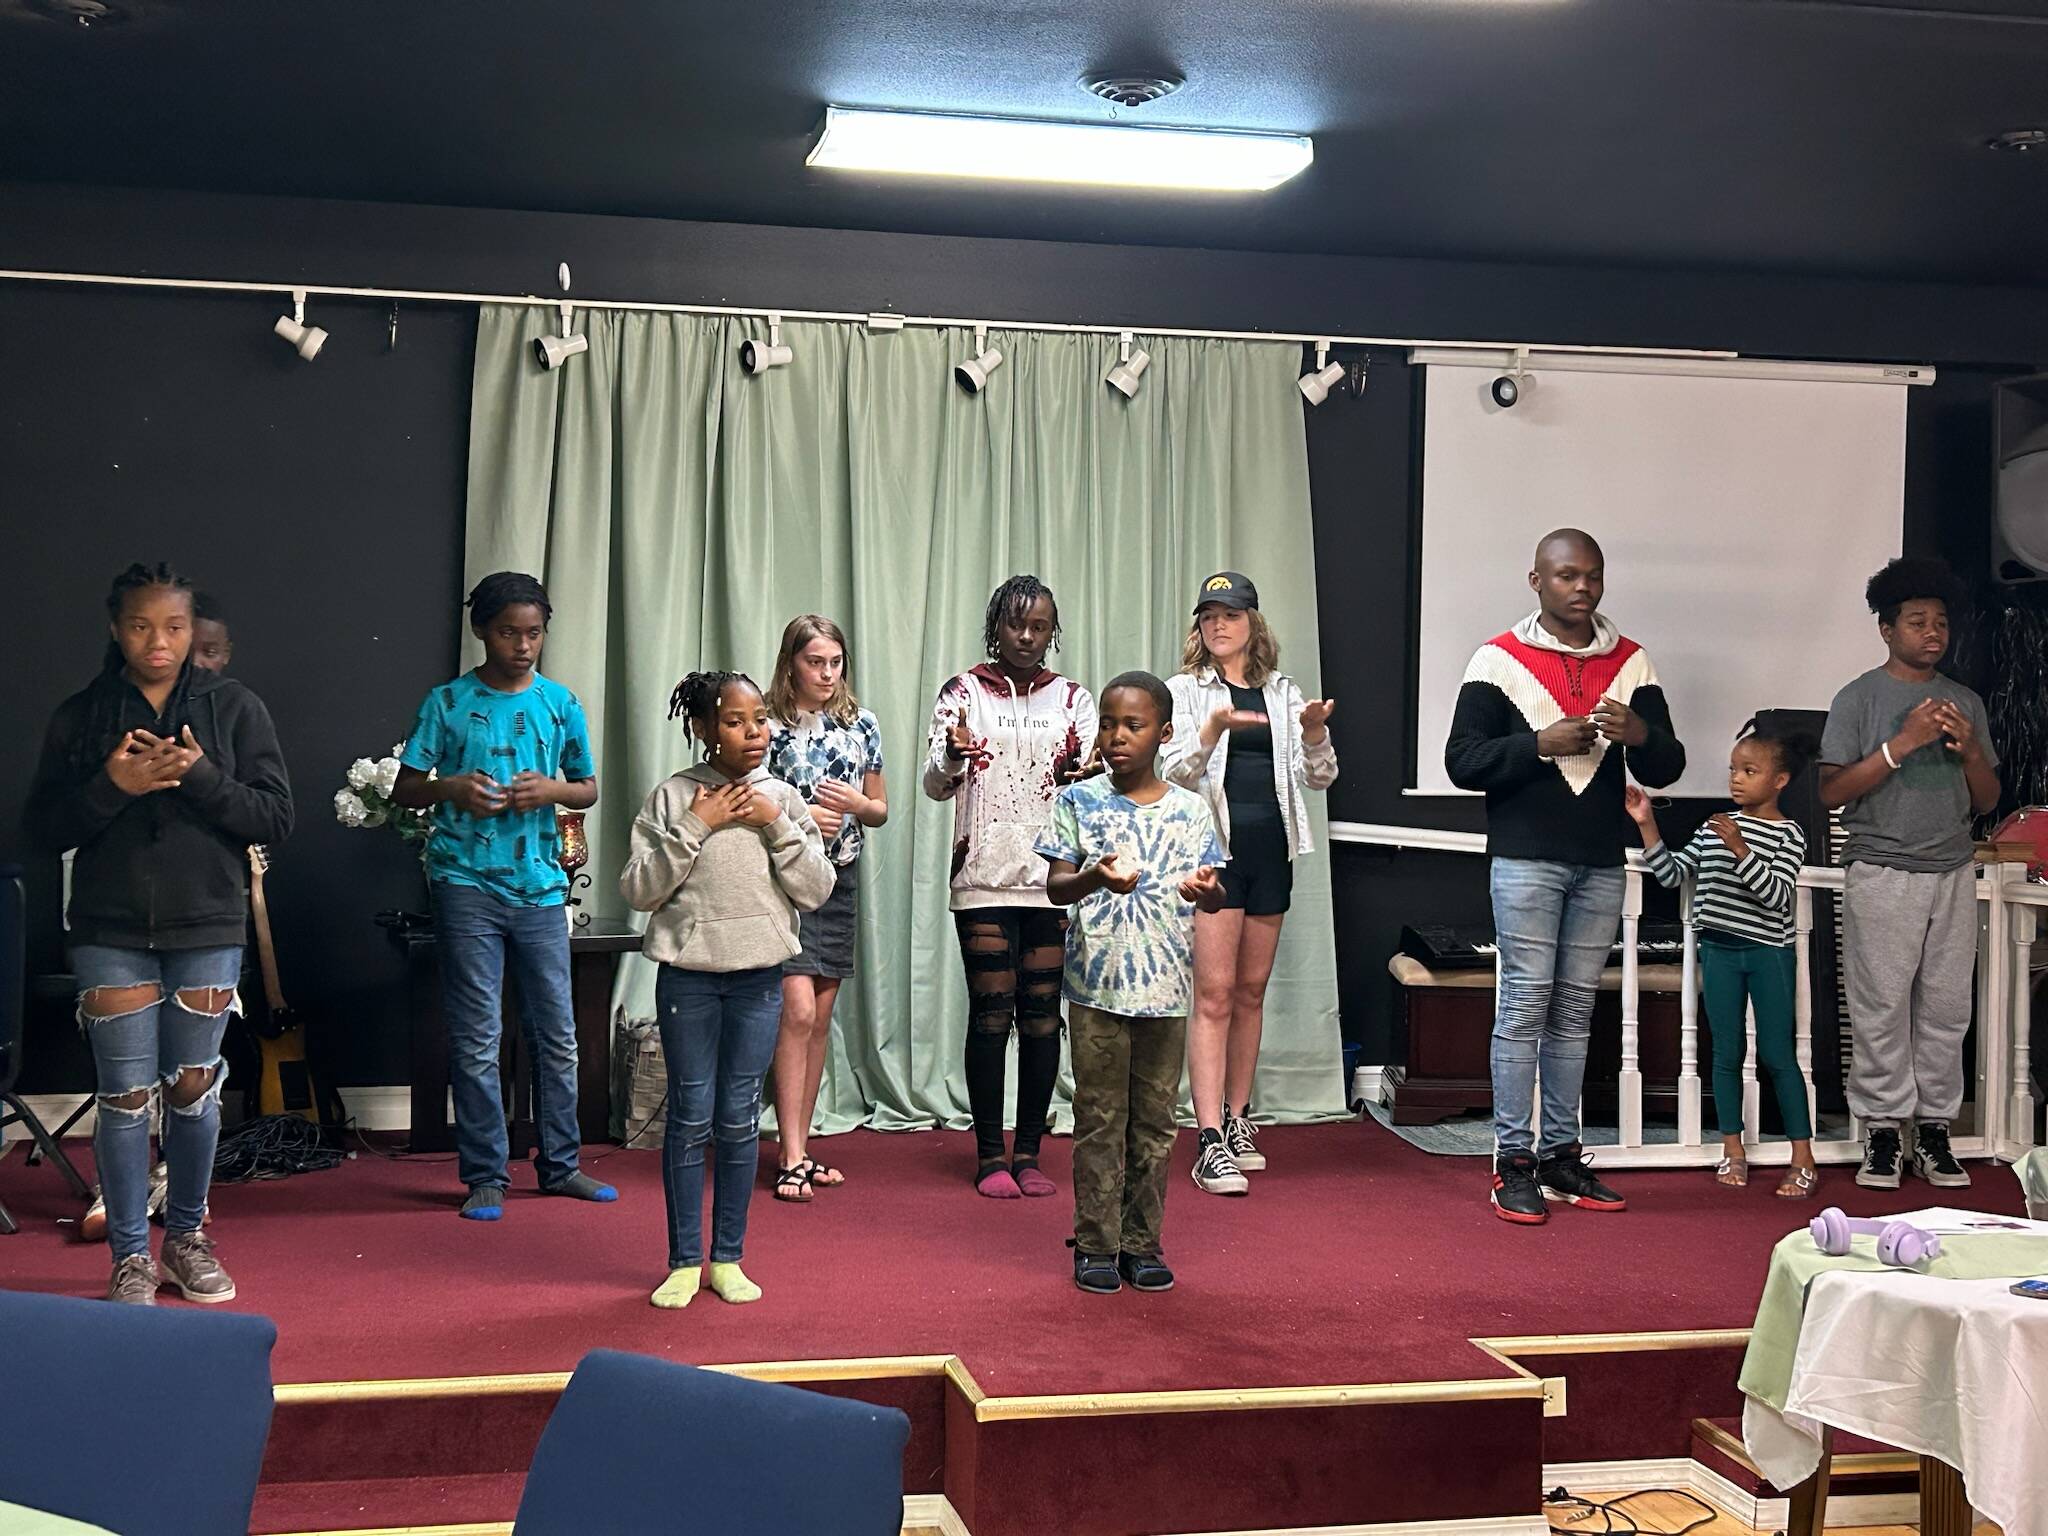 Photo provided
Children with Unity Fellowship rehearse for an upcoming Juneteenth program.